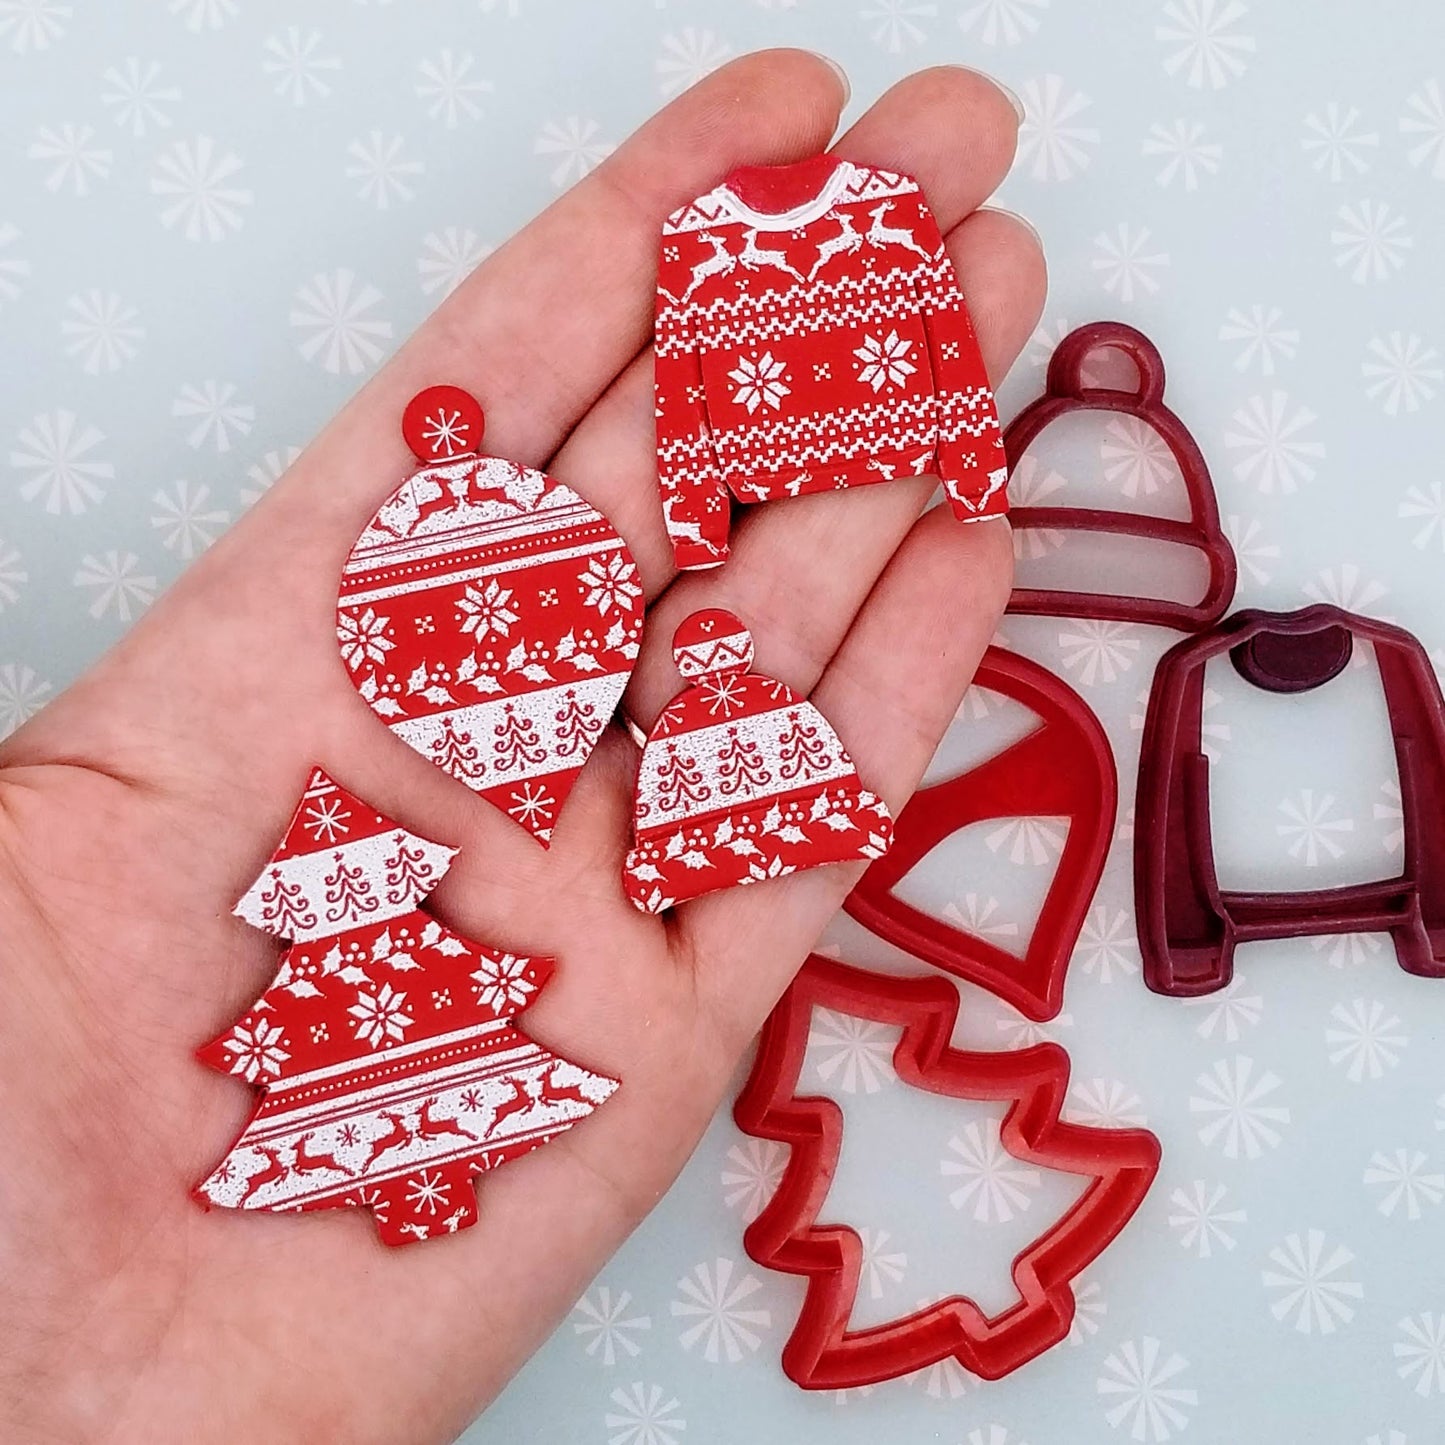 Christmas Knits Design Silkscreen Stencils for Polymer Clay Jewelry Earrings Charms and Ornaments